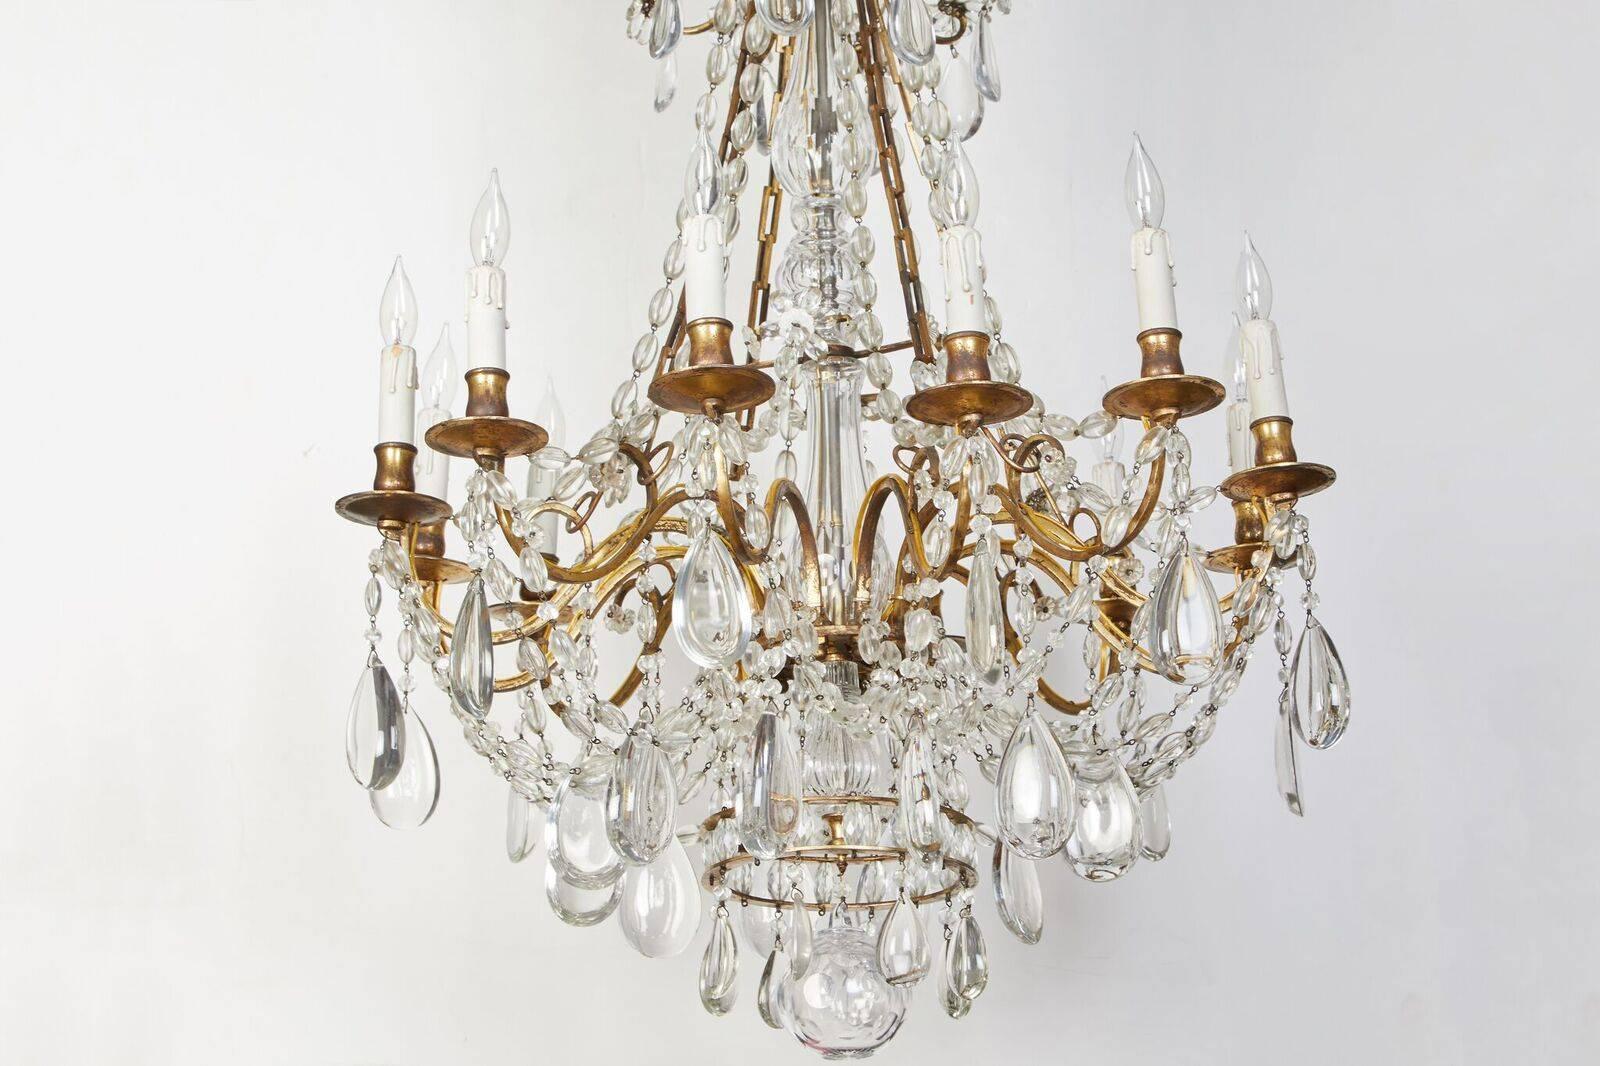 Elegant, circa 1900, French, gilt bronze, twelve-arm chandelier with generous layers of crystal swags and large drops of the same. Wonderful patina. Wired for U.S. current.